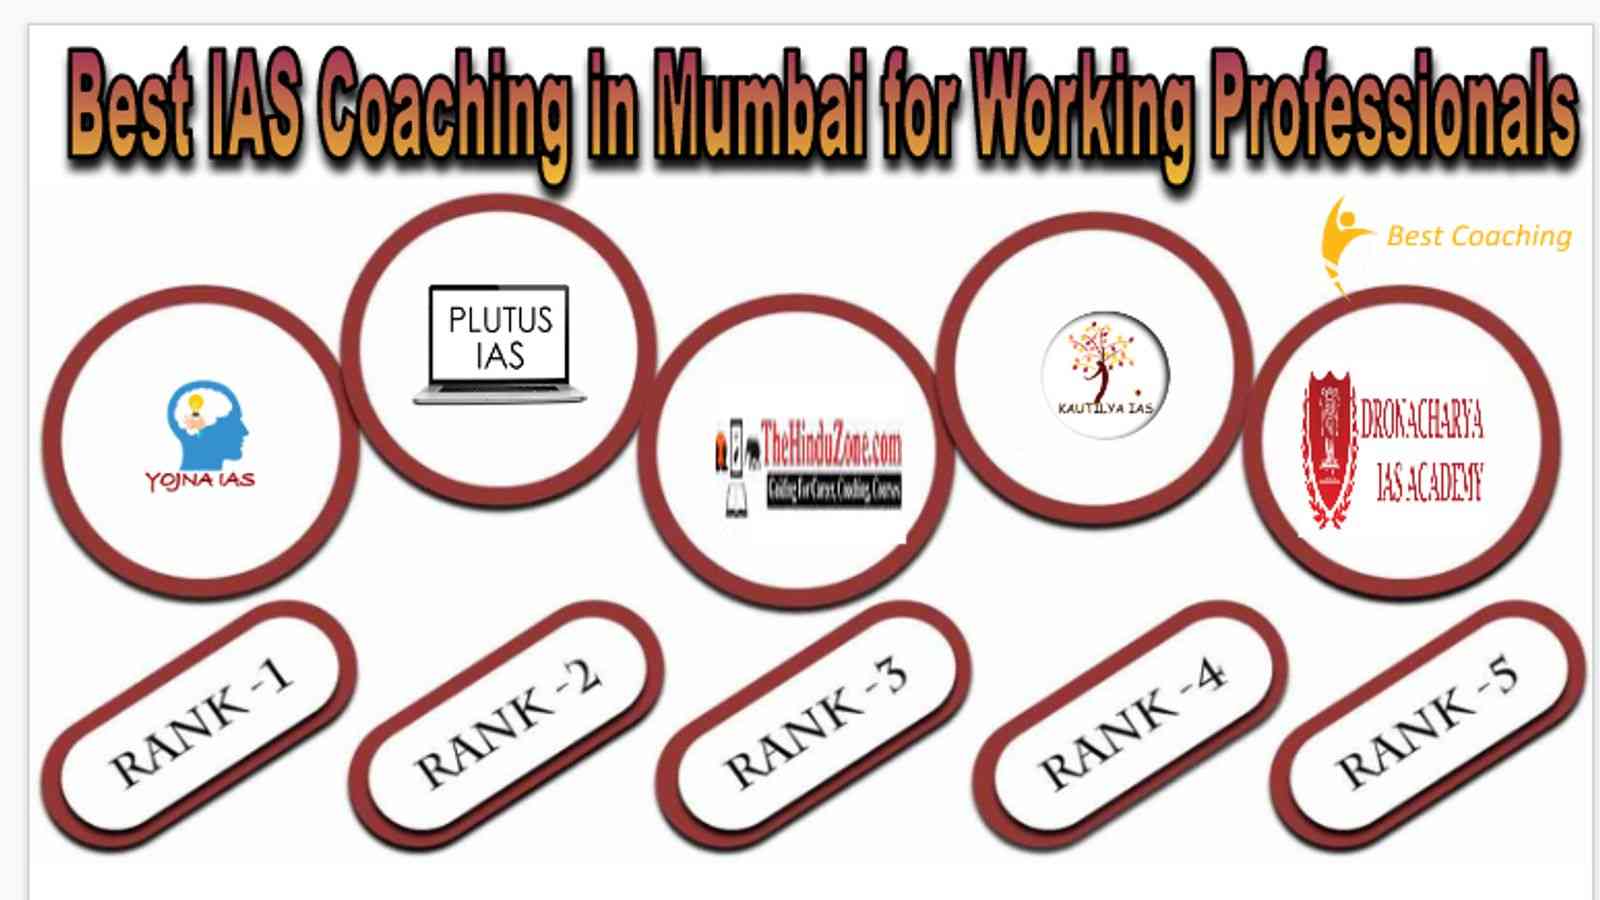 Best IAS Coaching in Mumbai for Working Professionals